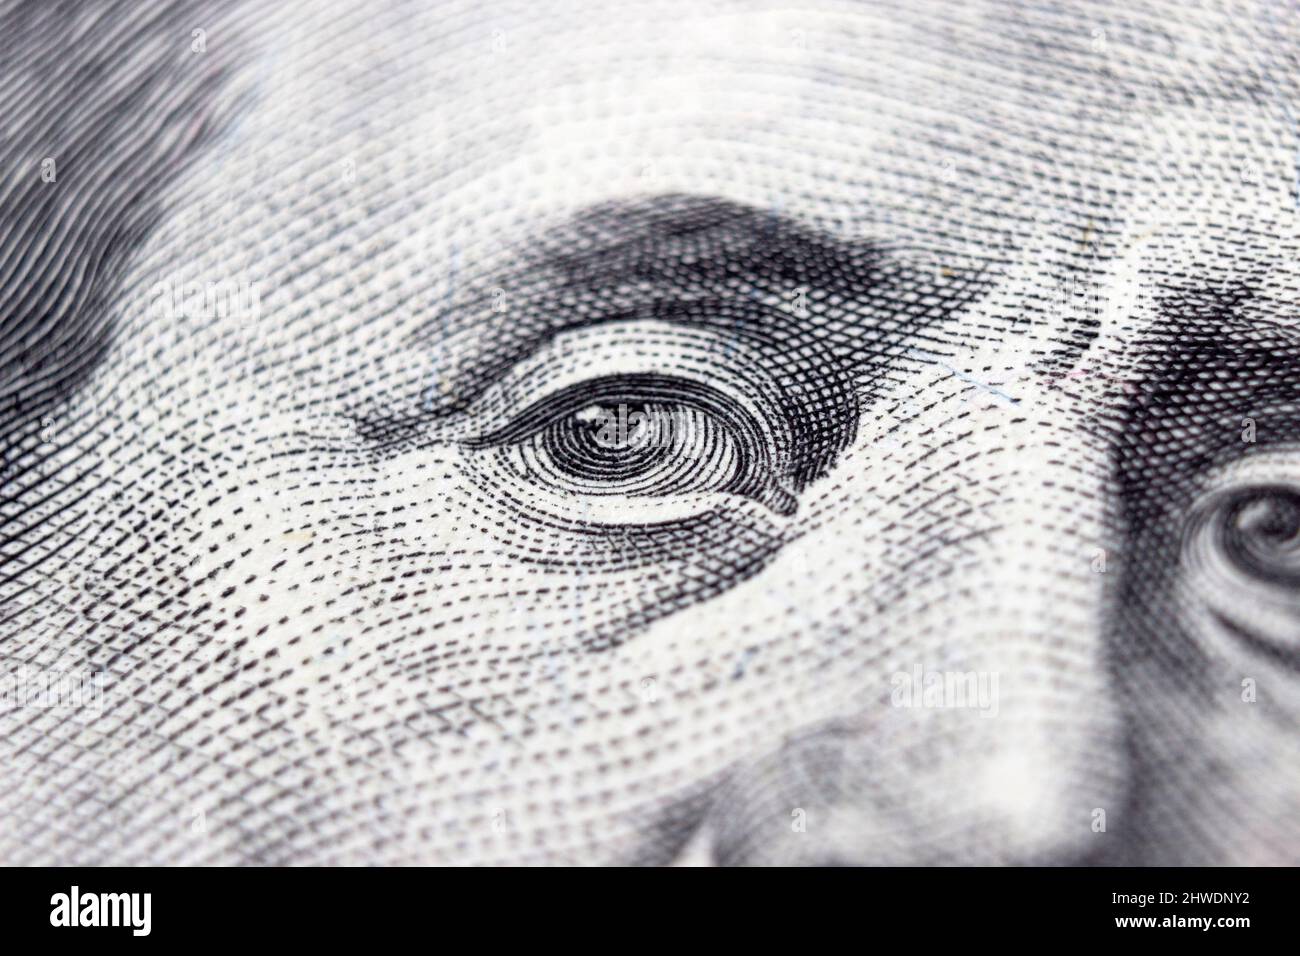 One hundred dollars bill fragment with the portrait Benjamin Franklin's eyes. 100 Stock Photo